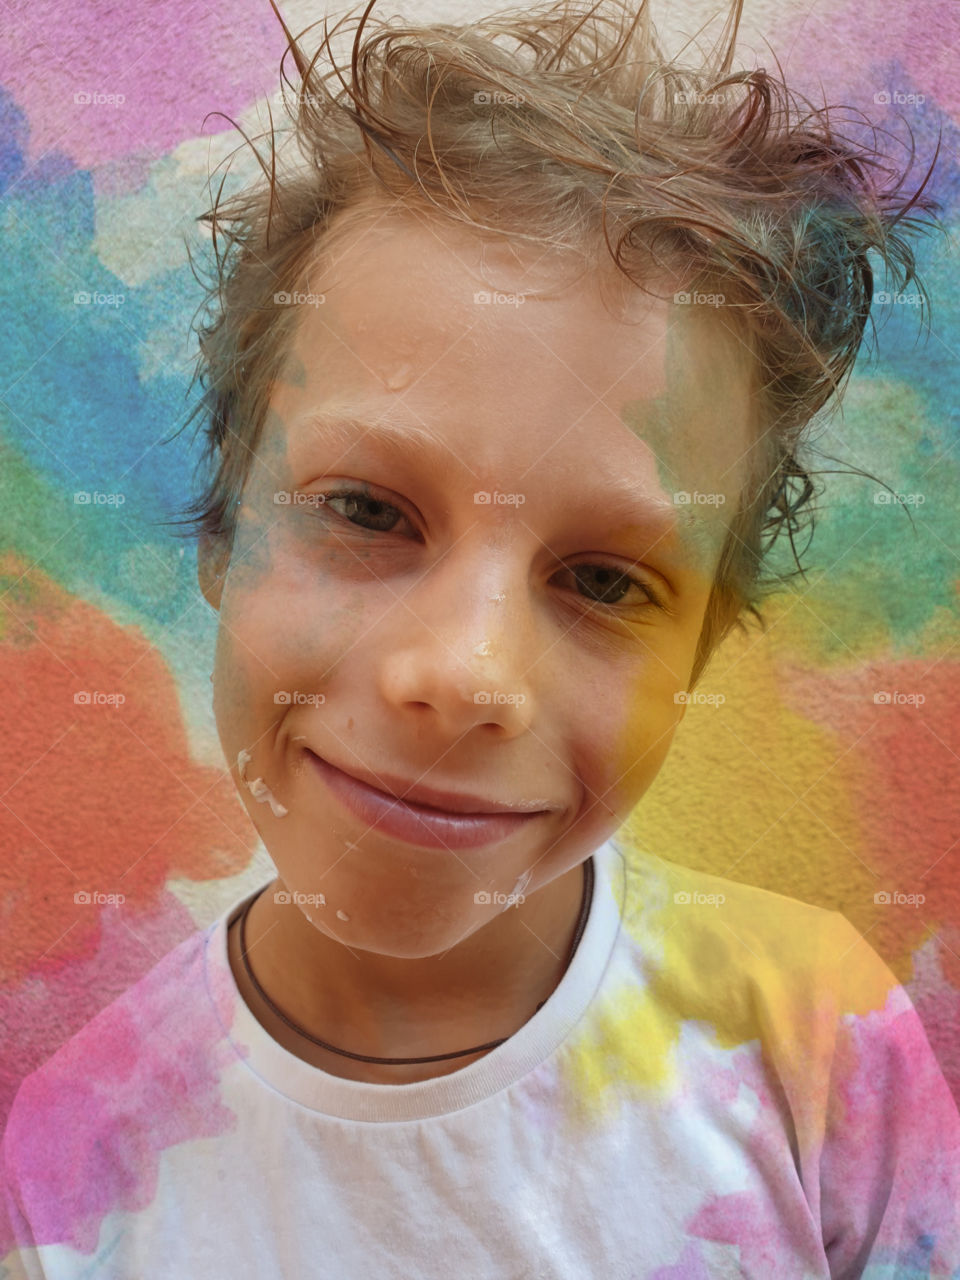 Selfie of a boy, a schoolboy after drawing, stained with paint with a dirty face, with tousled hair on the background of the wall and decorative watercolor smudges.  Children's creativity